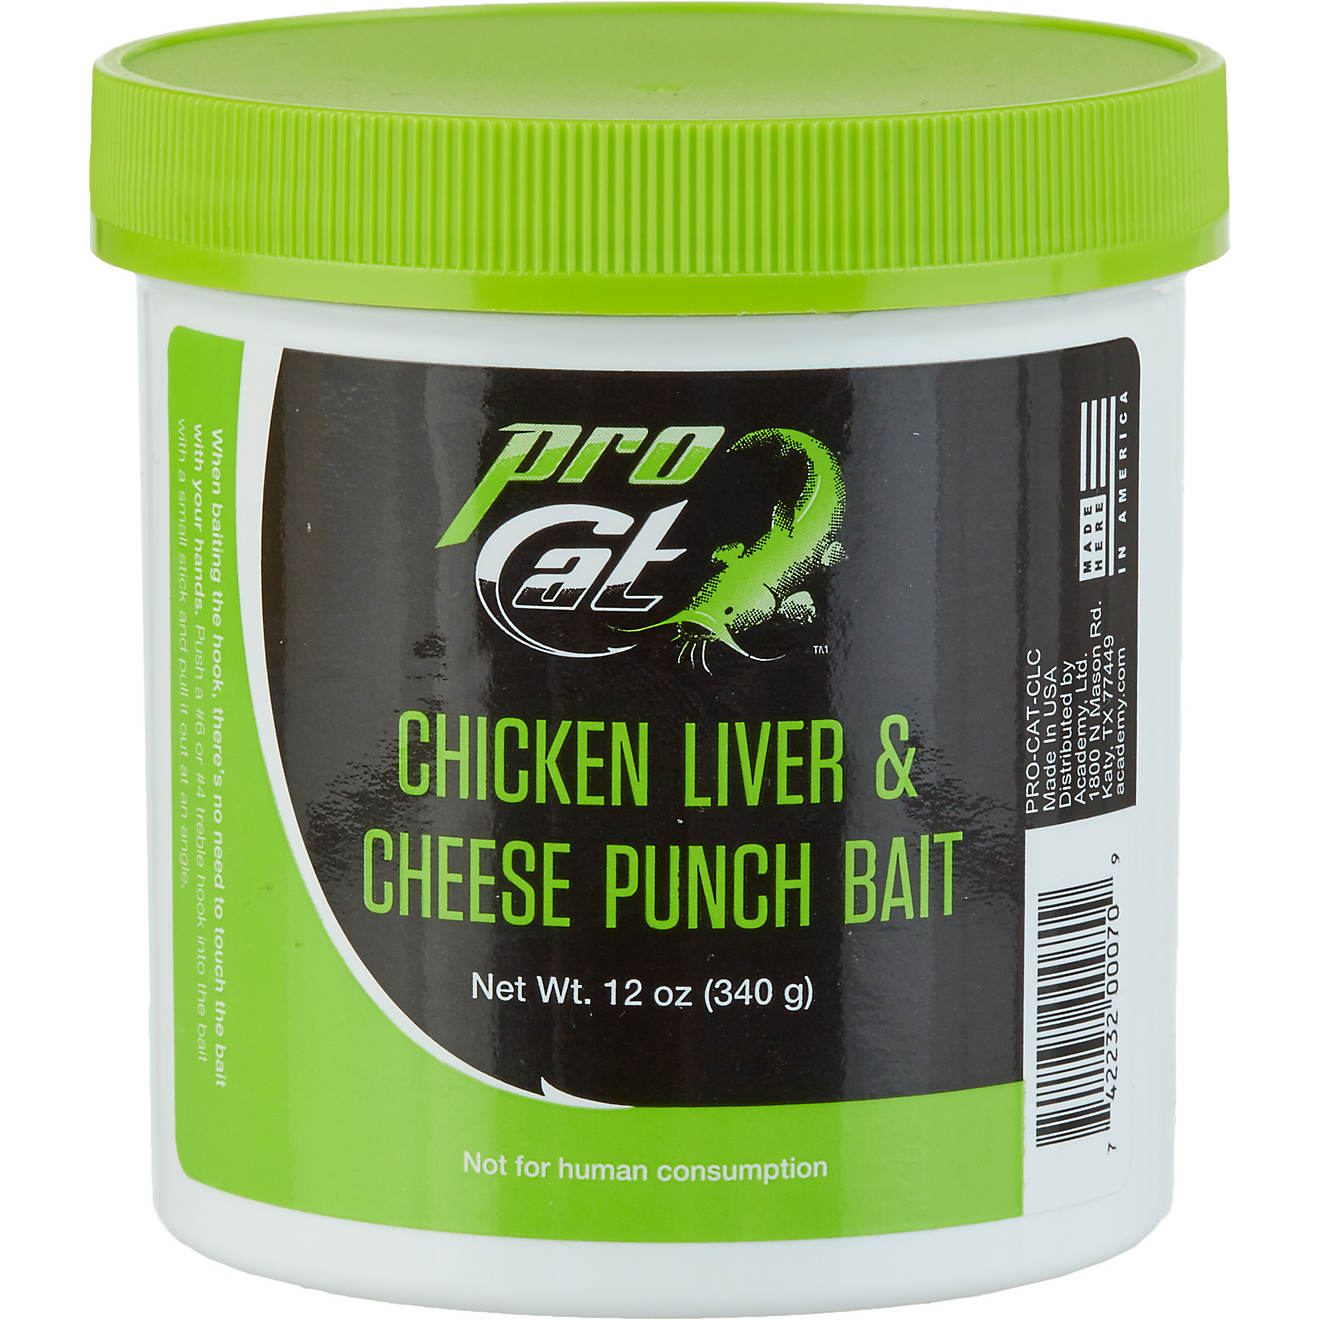 Pro Cat™ 14 oz. Chicken Liver and Cheese Punch Bait